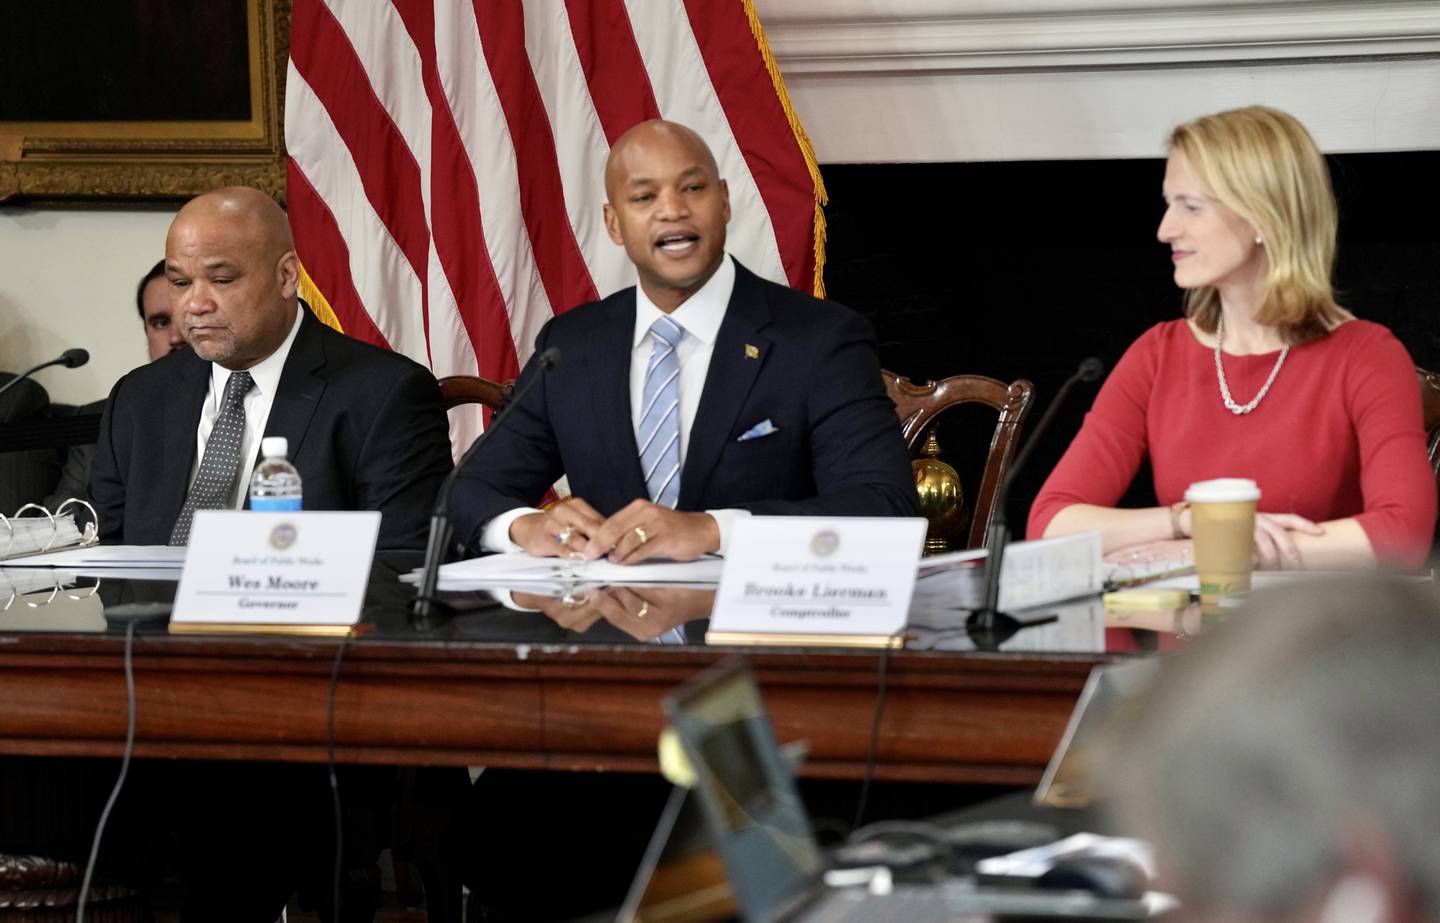 Governor Wes Moore, center, Treasurer Dereck Davis, left, and Comptroller Brooke Lierman, right, have the first annual meeting of the Maryland Board of Public Works at the Maryland State House on January 25, 2023.